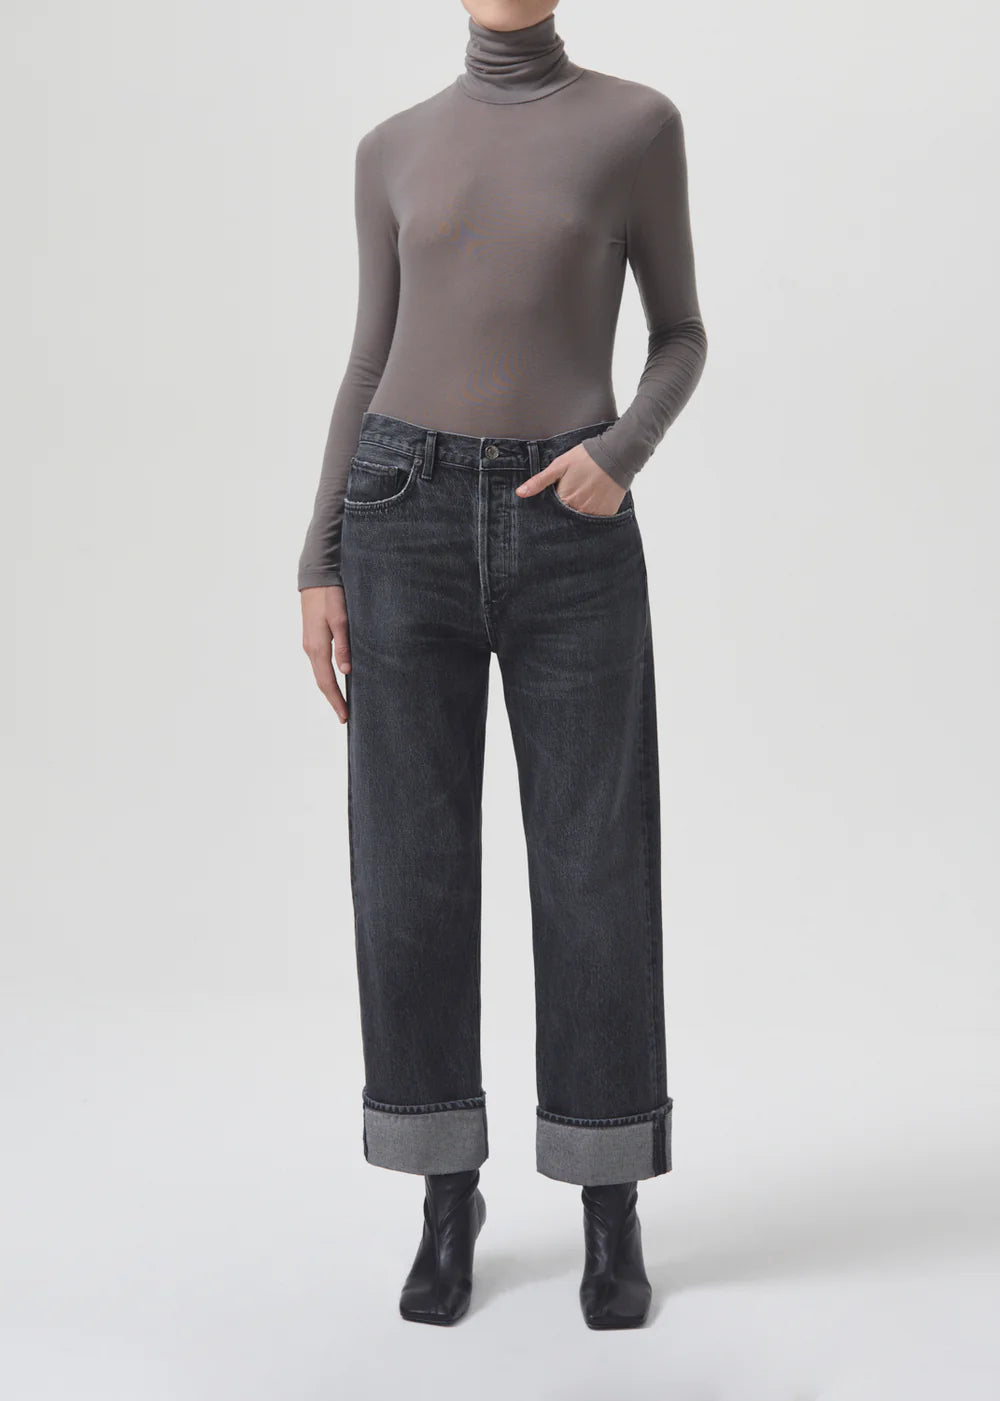 The model is wearing a turtle neck top and AGOLDE Fran Low Slung Straight - Ditch jeans.